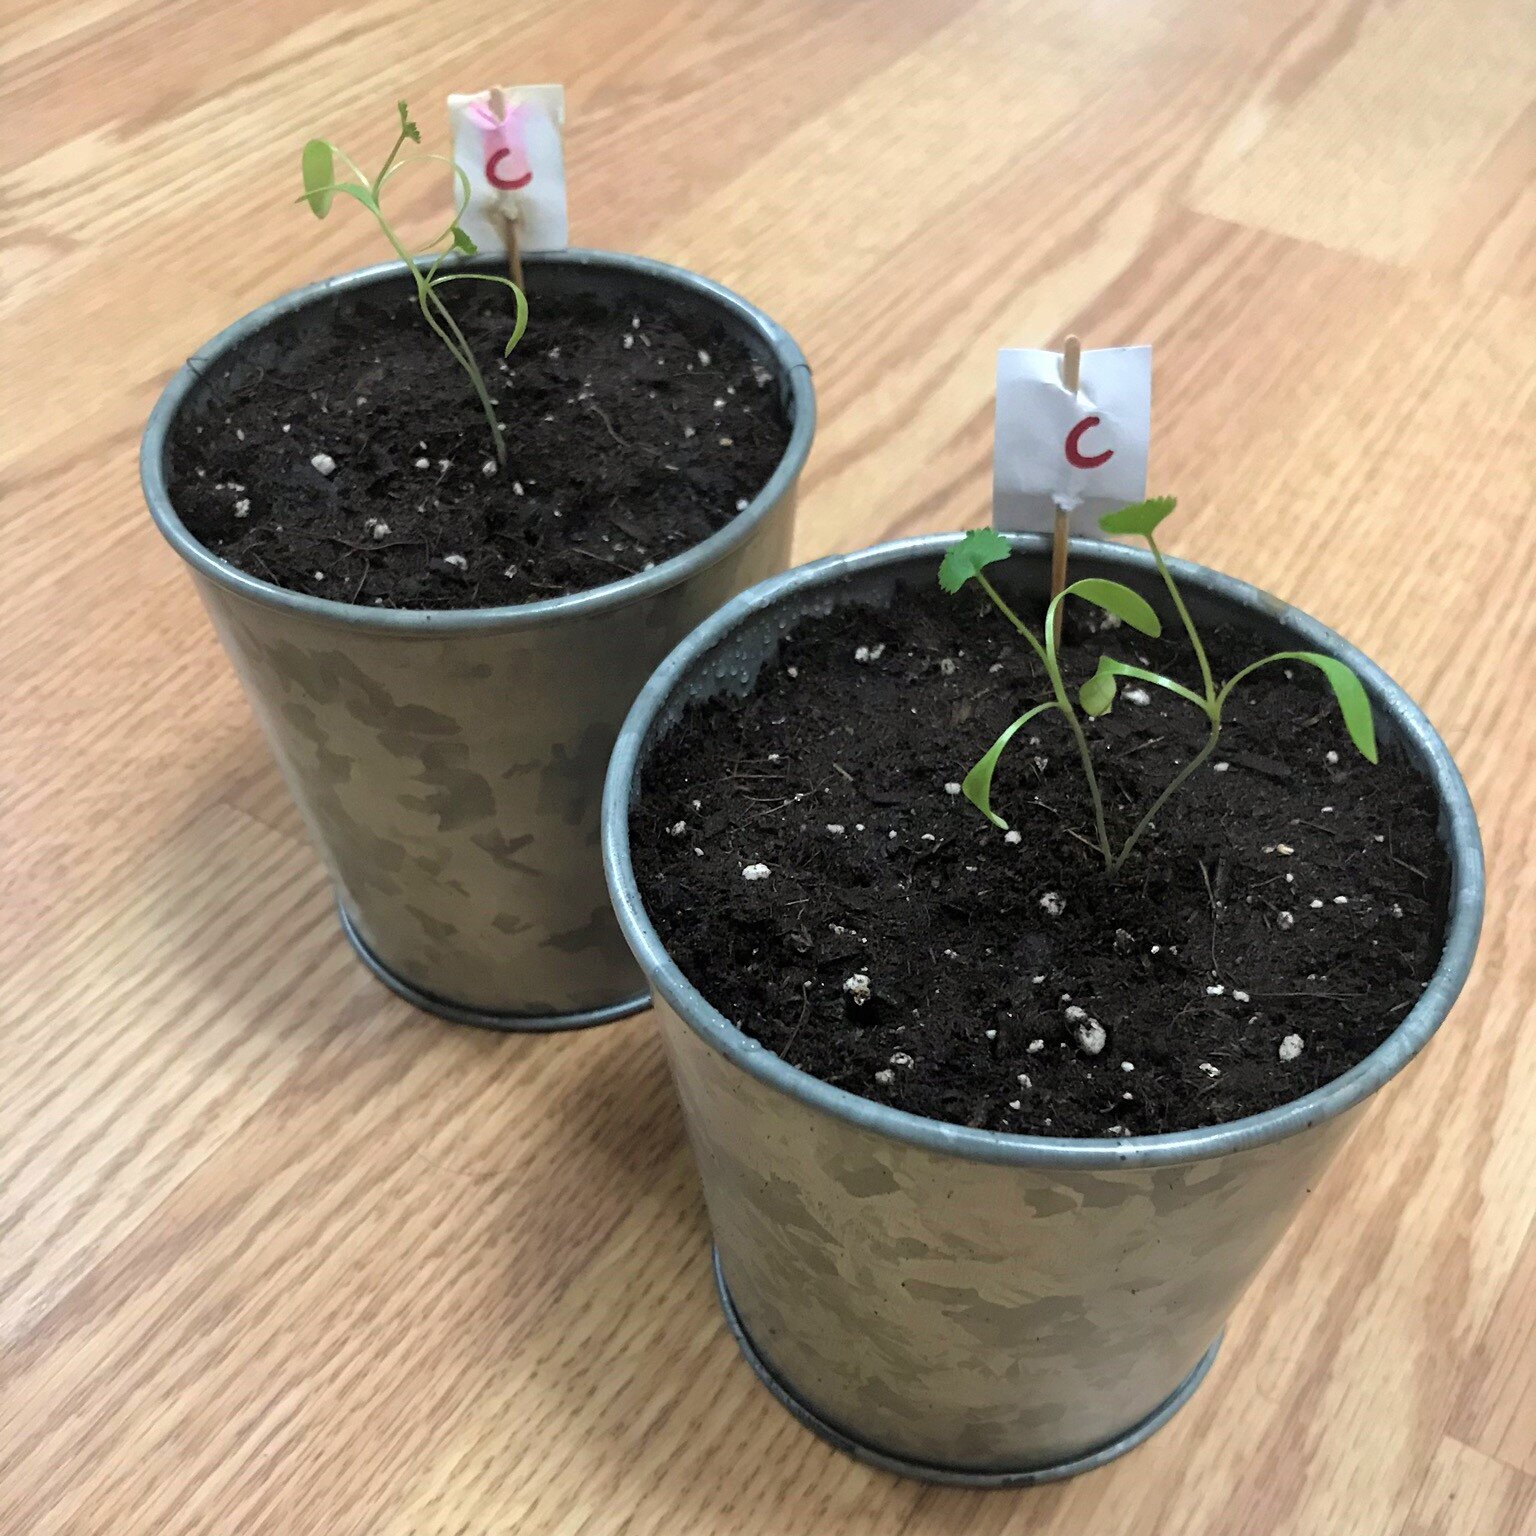 The cilantro seeds I planted last year took off quickly! I transplanted them into these metal containers by slightly opening the cardboard bottom and gently setting the seedling directly into the soil still in the toilet paper roll.